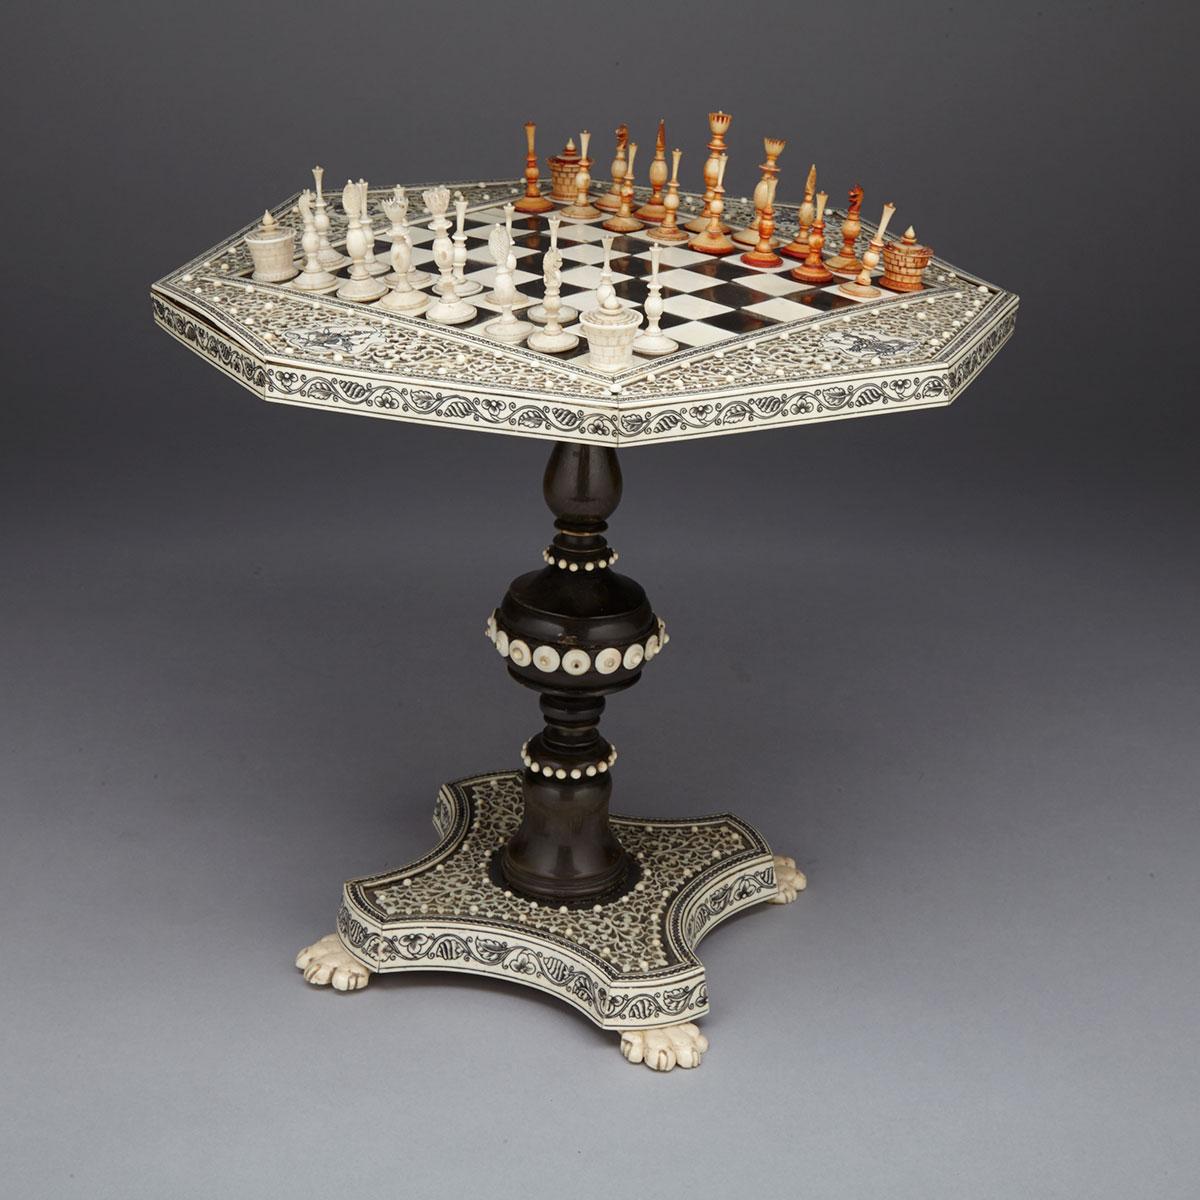 ANGLO-INDIAN MINIATURE IVORY AND HORN GAME TABLE AND CHESS SET, VIZAGAPATAM, C.1840